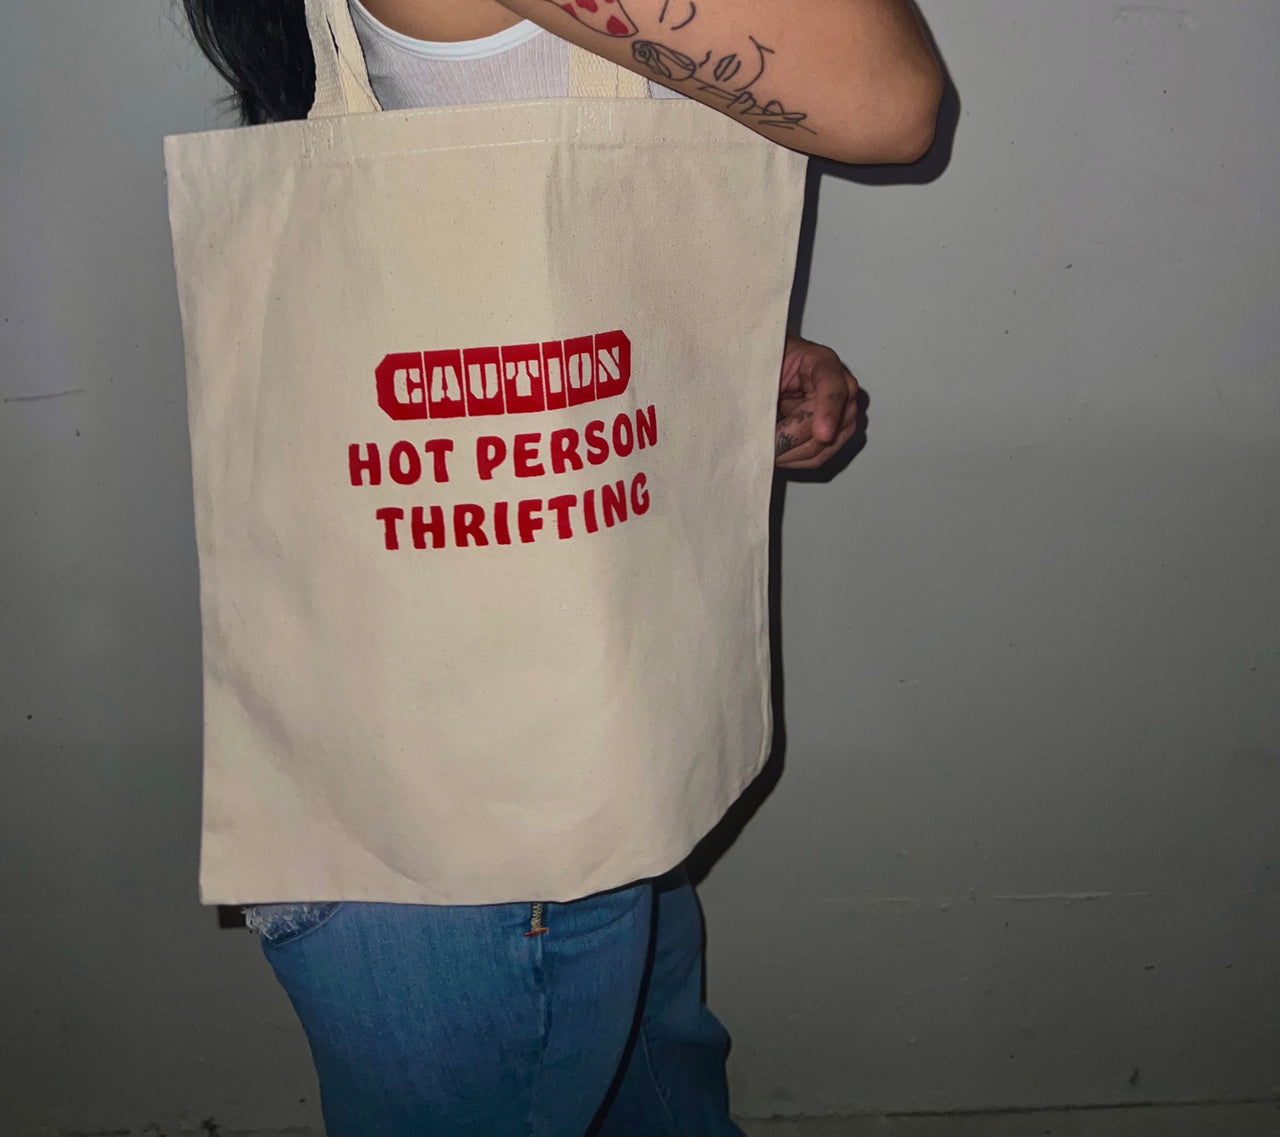 Hot person thrifting tote bag